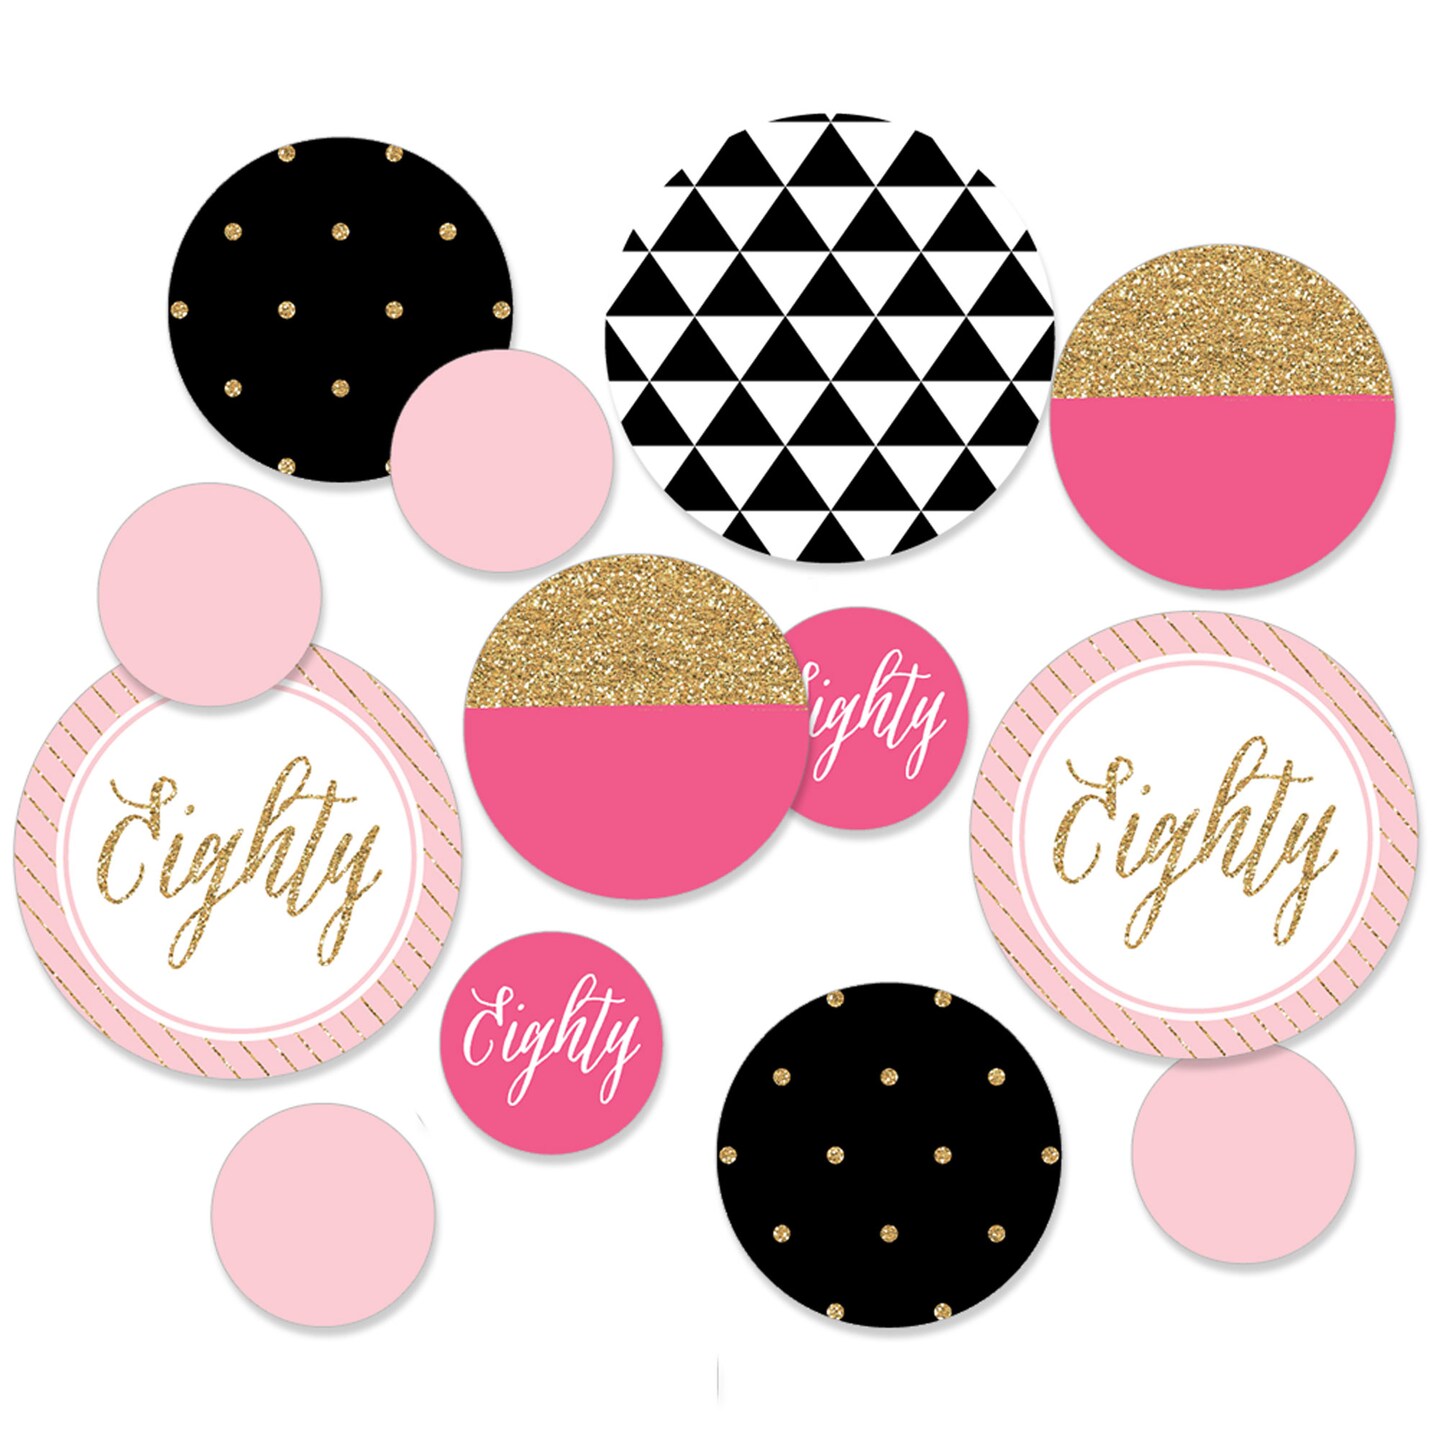 Big Dot of Happiness Chic 80th Birthday - Pink, Black and Gold - Birthday Party Giant Circle Confetti - Party Decorations - Large Confetti 27 Count